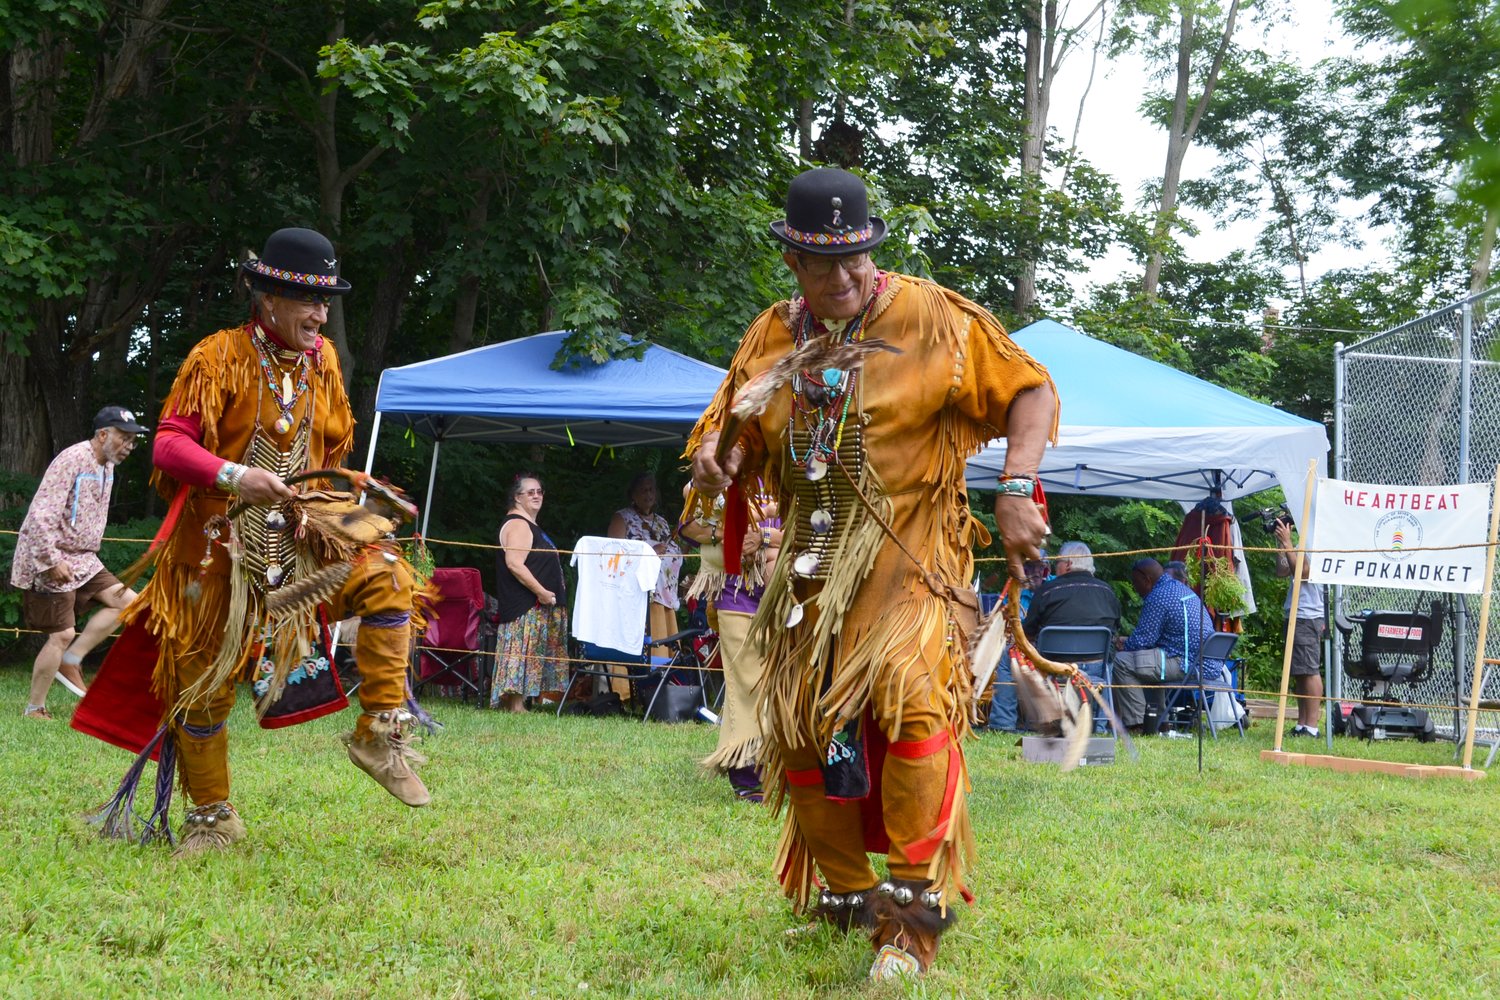 Lee Braveheart Edmonds and Harry Hawk Edmonds, brothers within the Pokanoket Tribe, put on an electrifying show of traditional dancing to begin the Pokanoket Heritage Day on Sunday at Burr’s Hill Park in Warren.